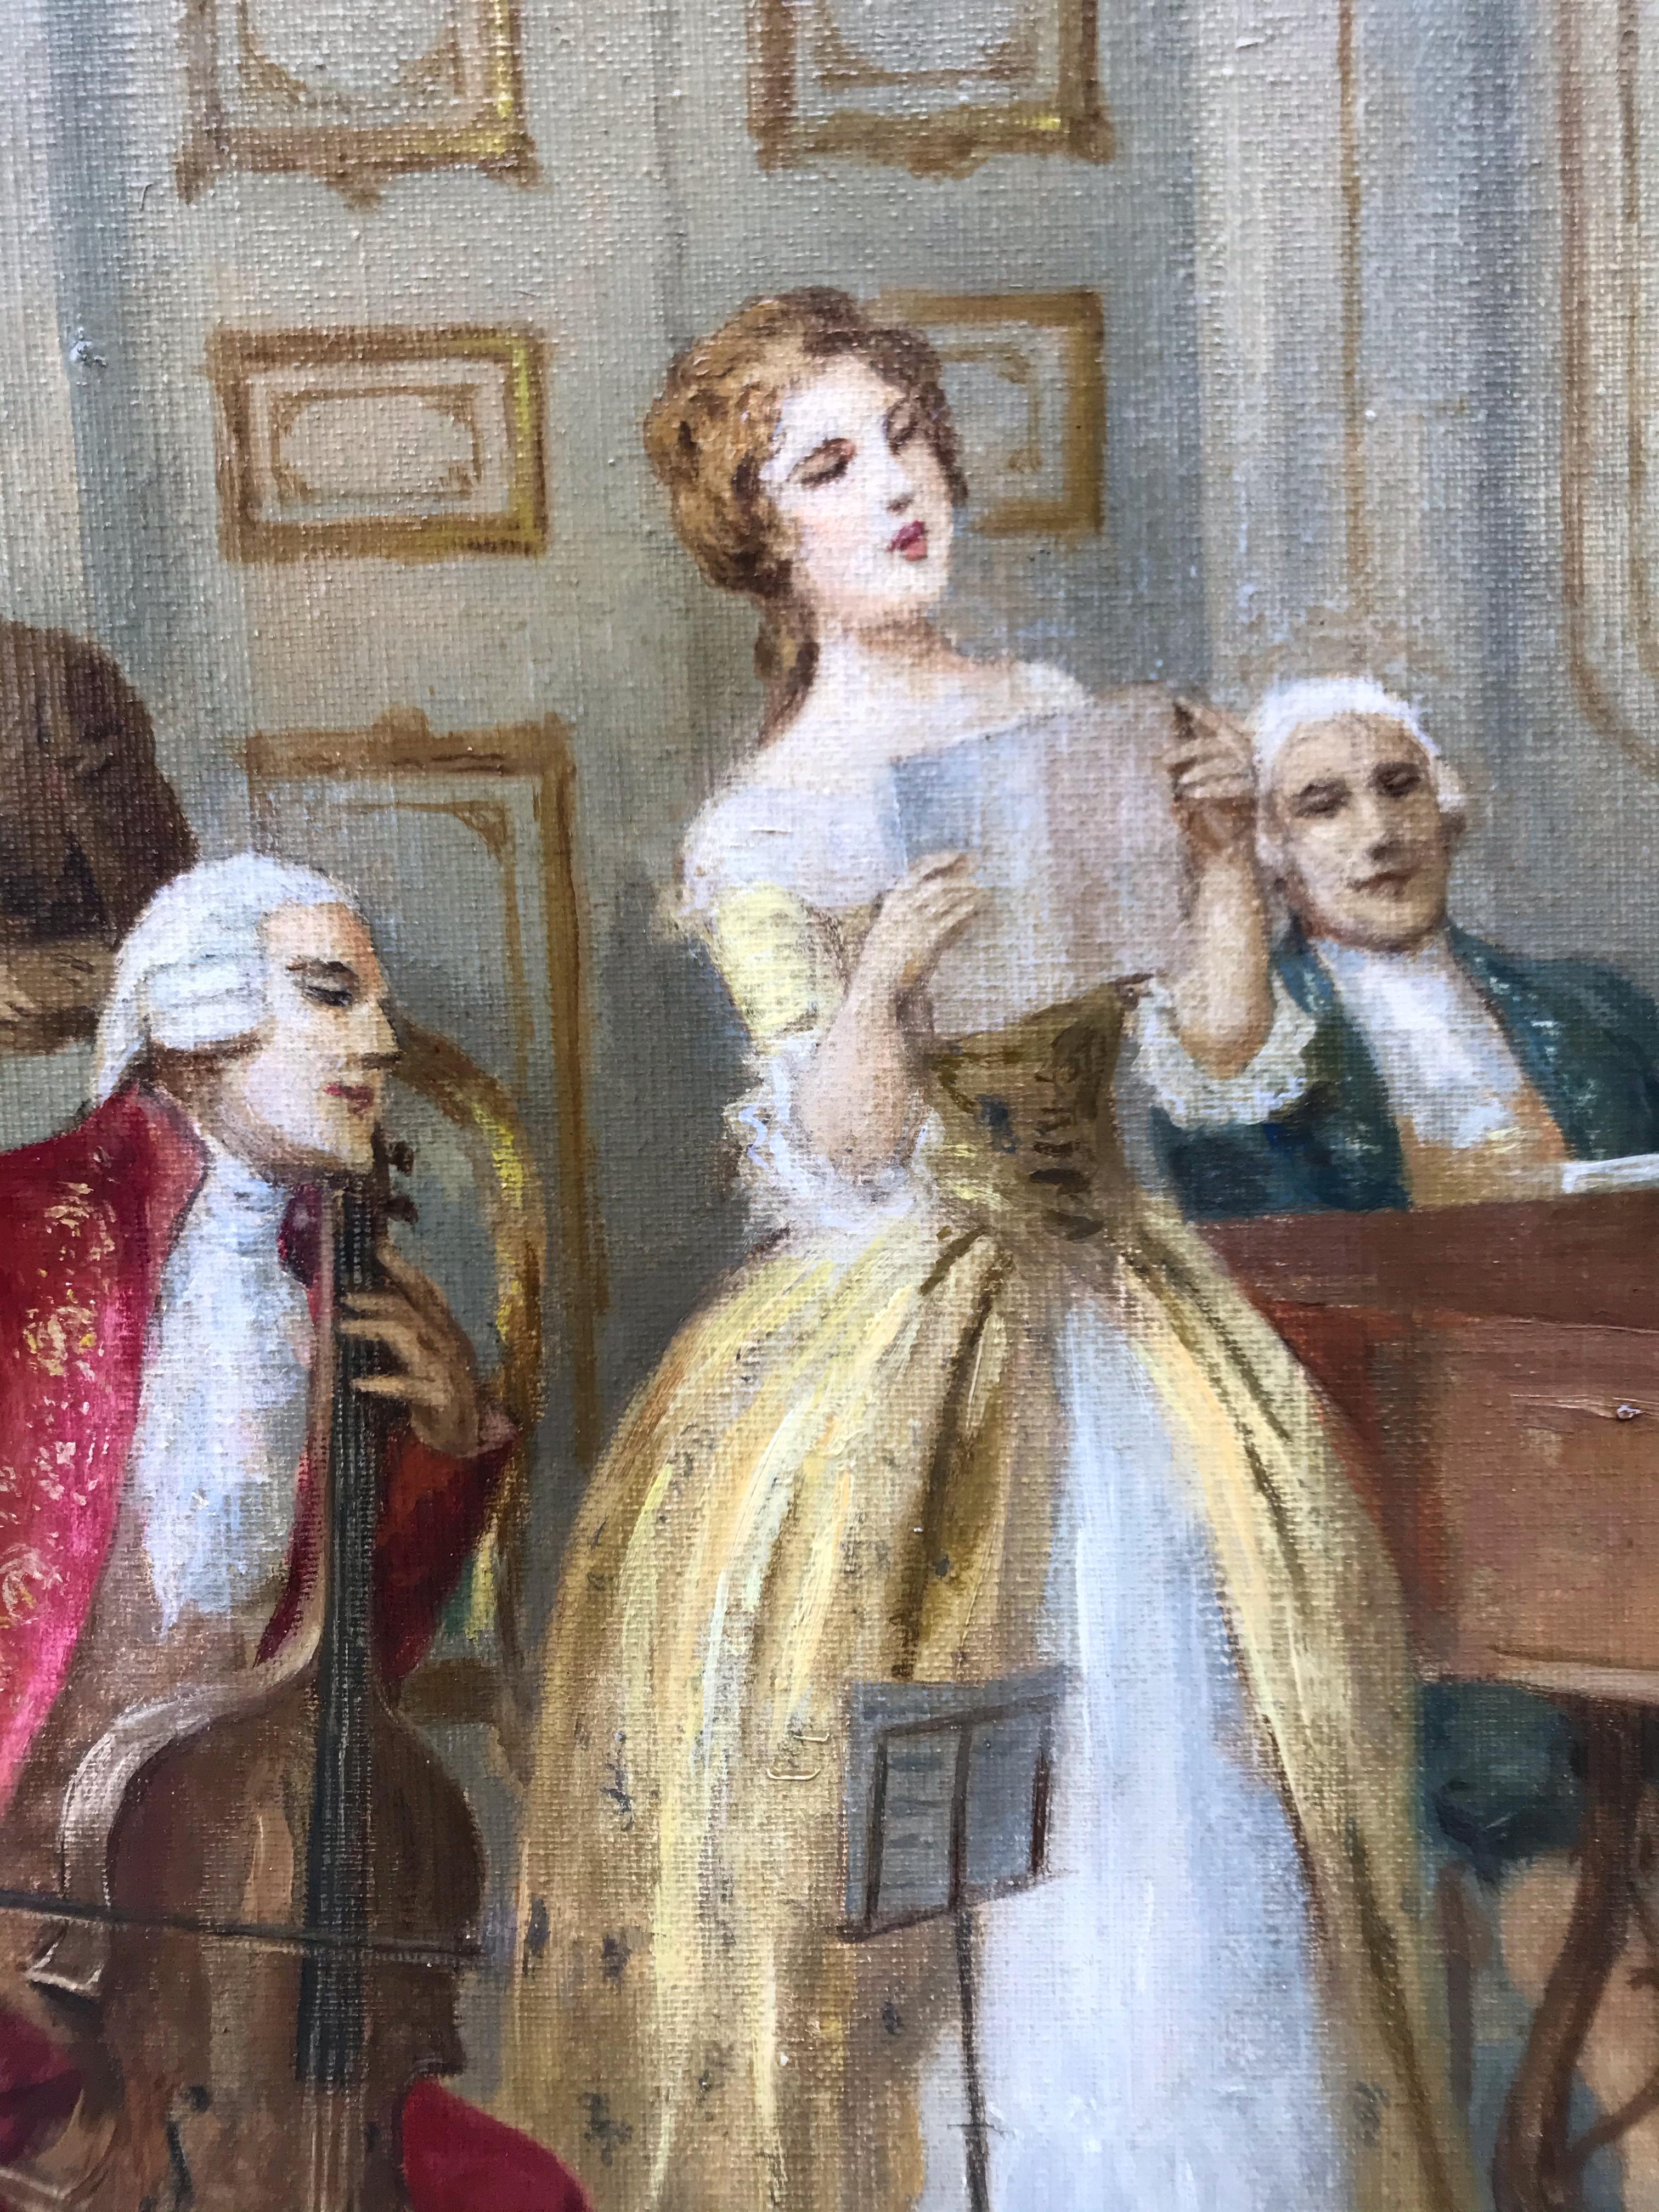 Private Music Concert in the 18th Century 9